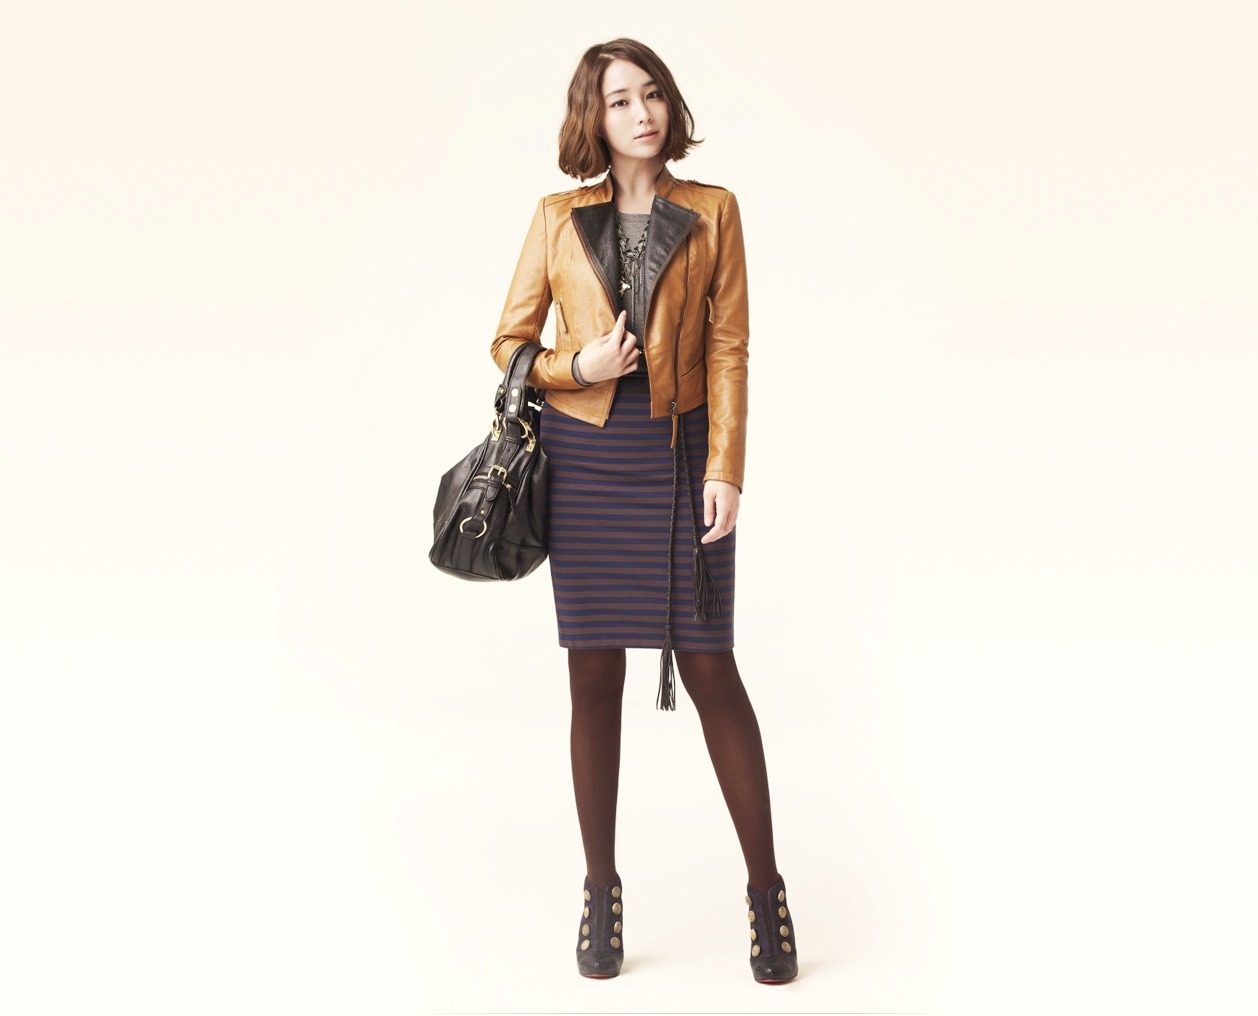  Lee Min-jung for Mind Bridge 2011 Fall Collection  